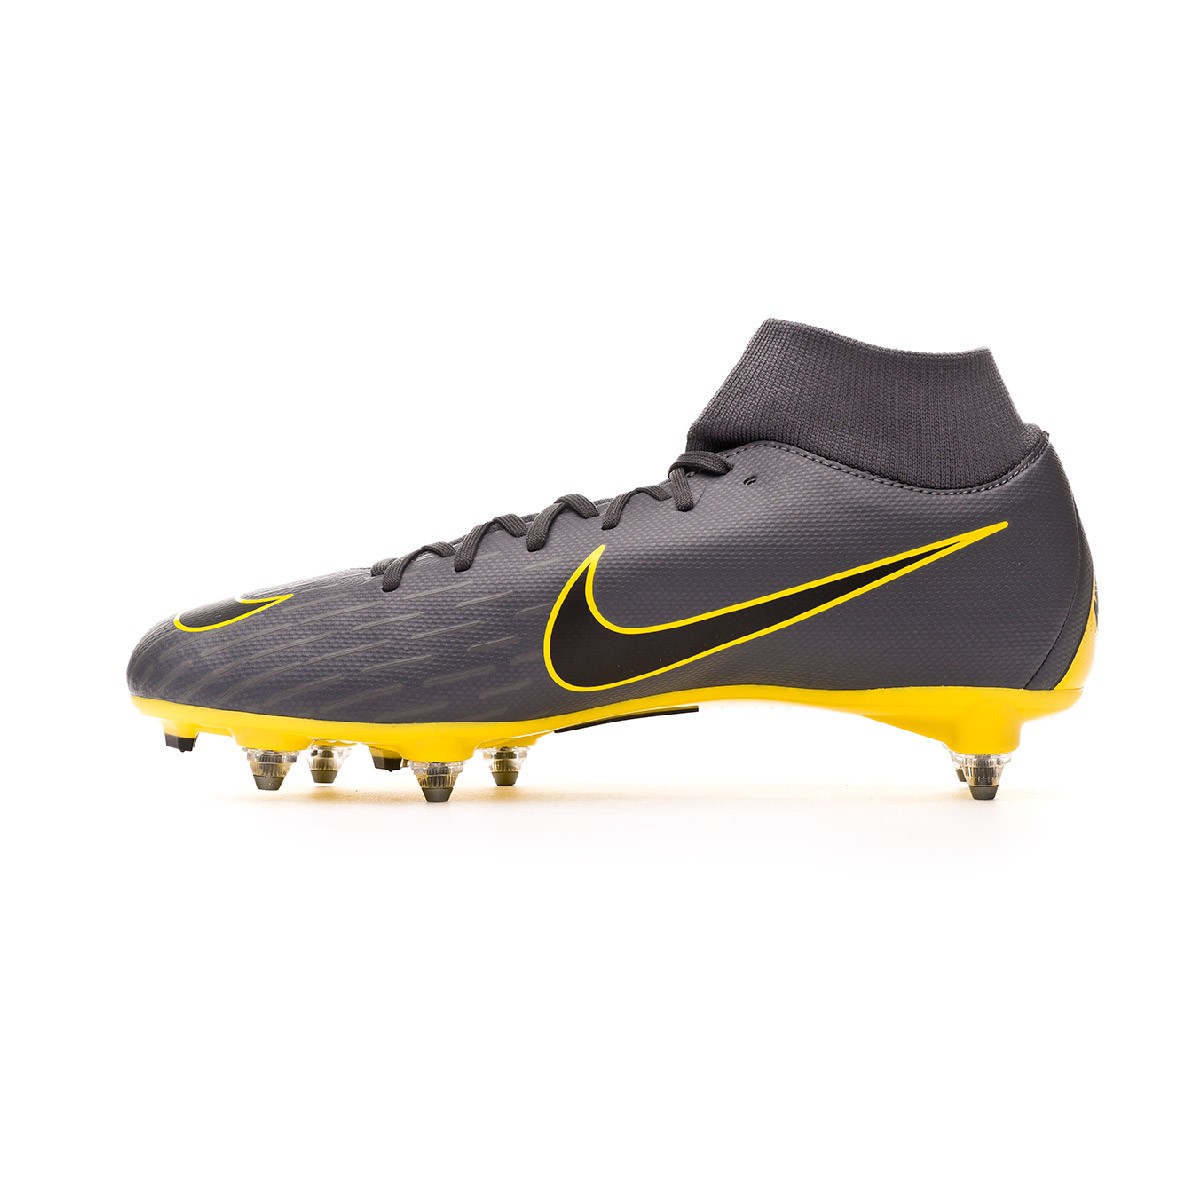 Indoor court shoes Nike SUPERFLY 6 ACADEMY IC.